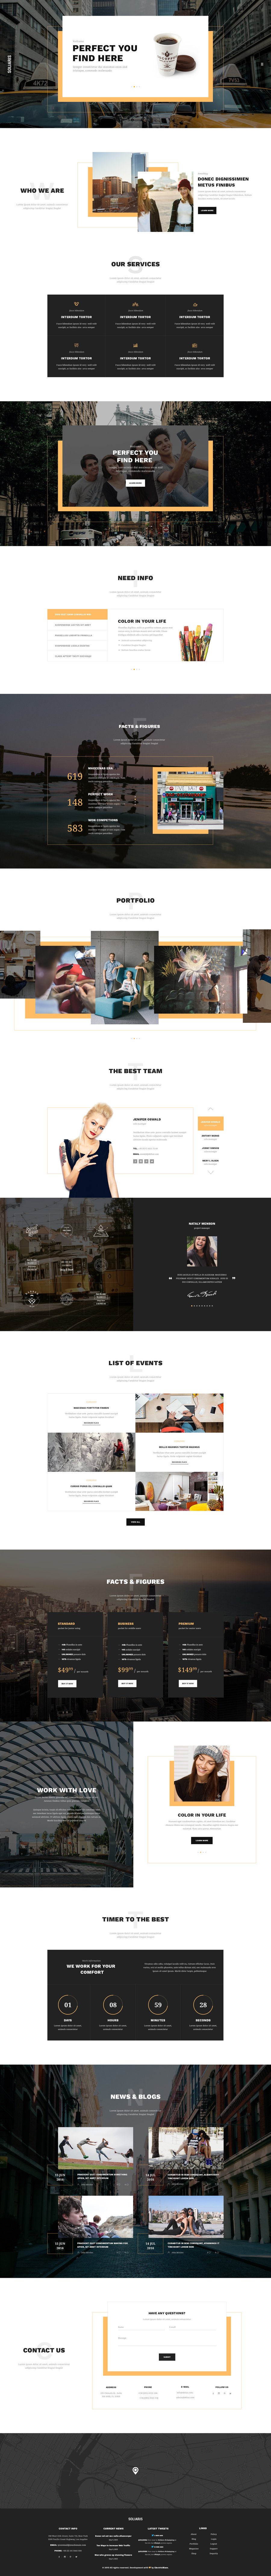 Soliaris - 18 One Page Bootstrap Templates - 6